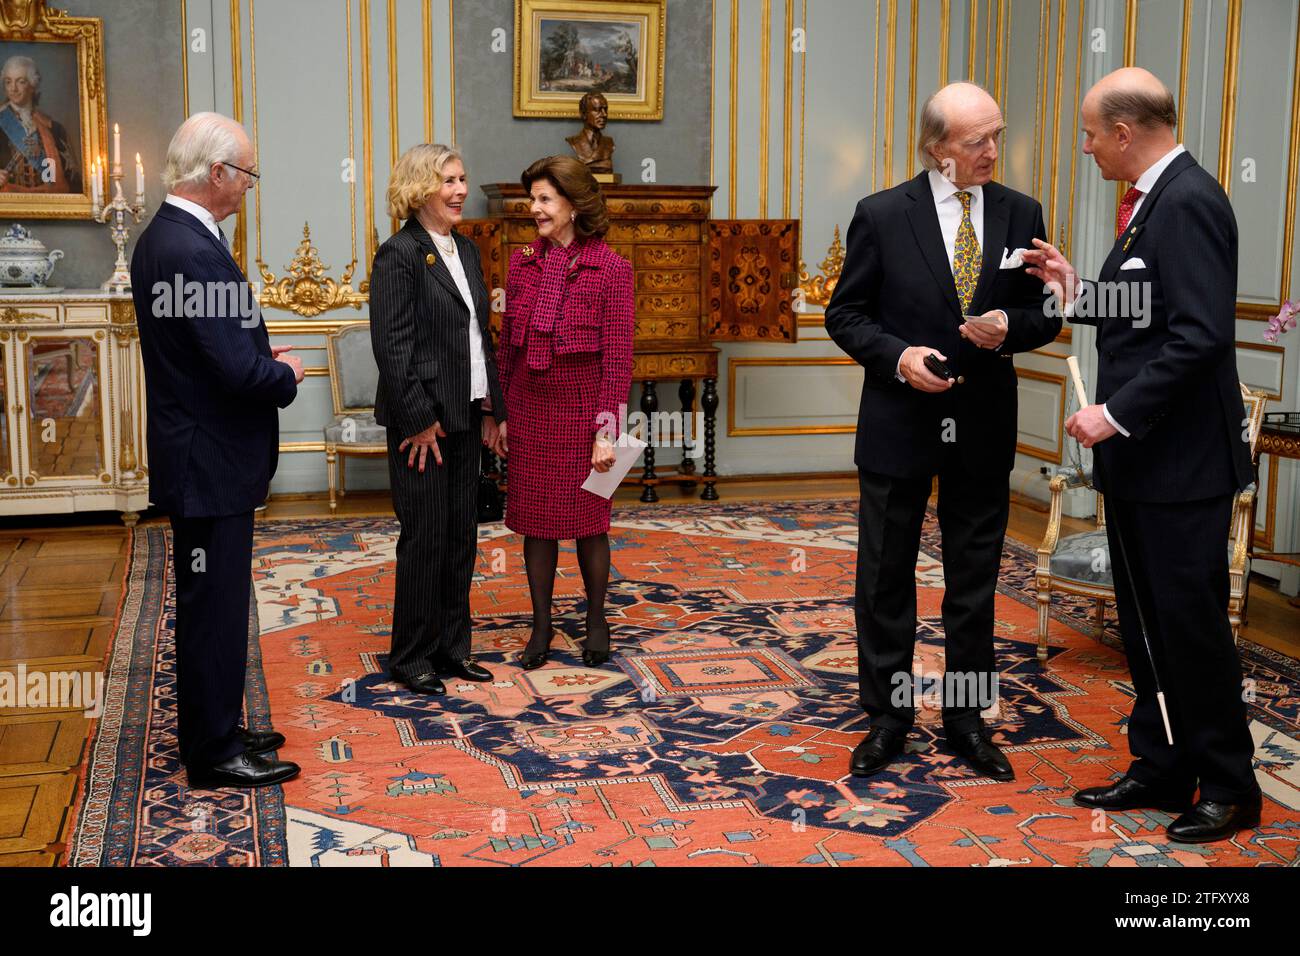 STOCKHOLM 20231220King Carl Gustaf, Queen Silvia, Kerstin Falkenberg and Henrik Falkenberg when they give Queen Silvia a gift at Stockholm Palace on the occasion of the Queen's upcoming 80th birthday. Photo: Jessica Gow/TT/Code 10070 Credit: TT News Agency/Alamy Live News Stock Photo